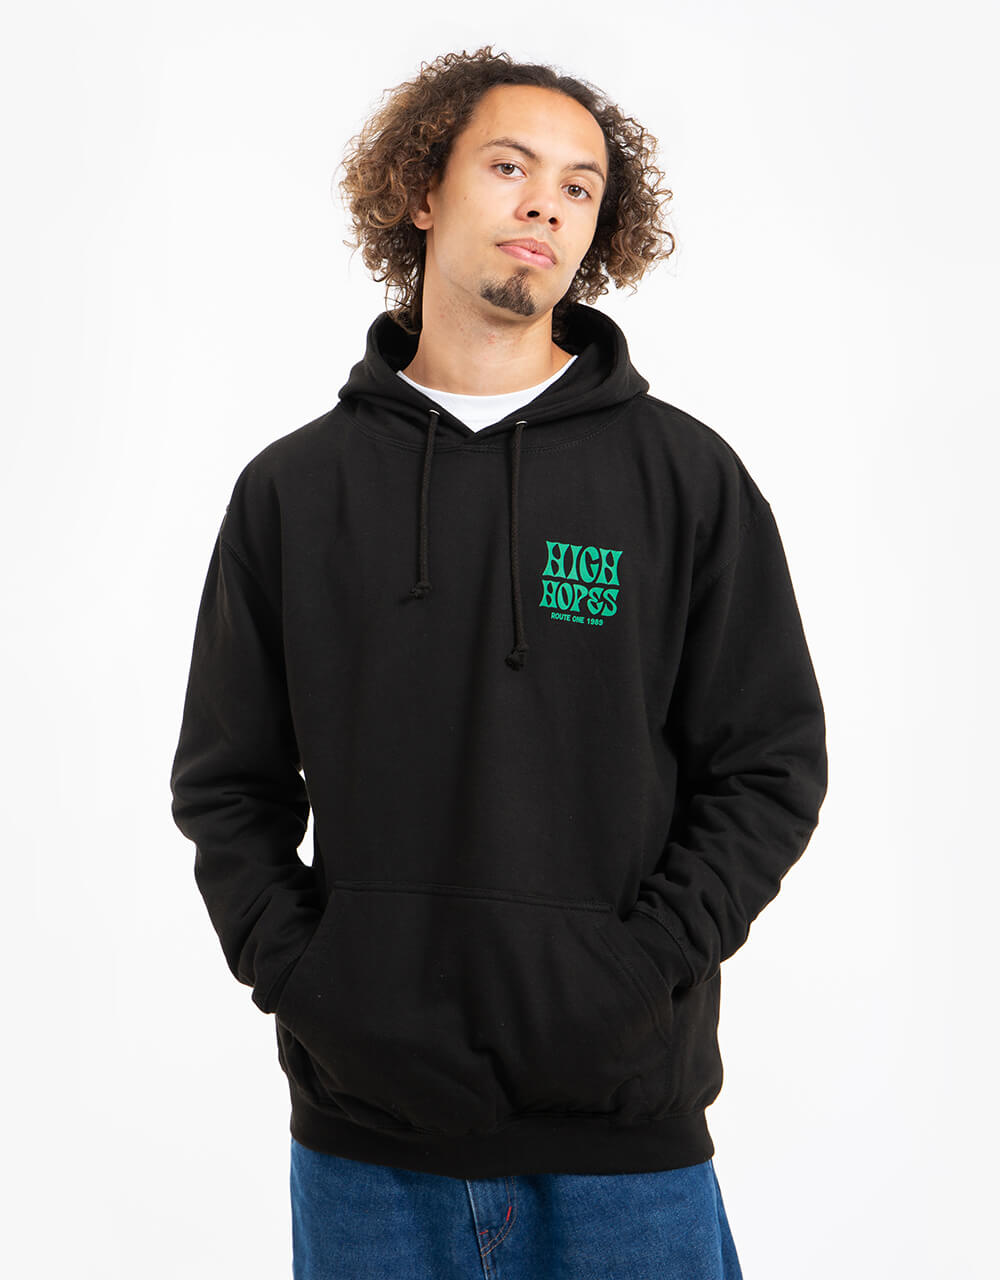 Route One High Hopes Pullover Hoodie - Black